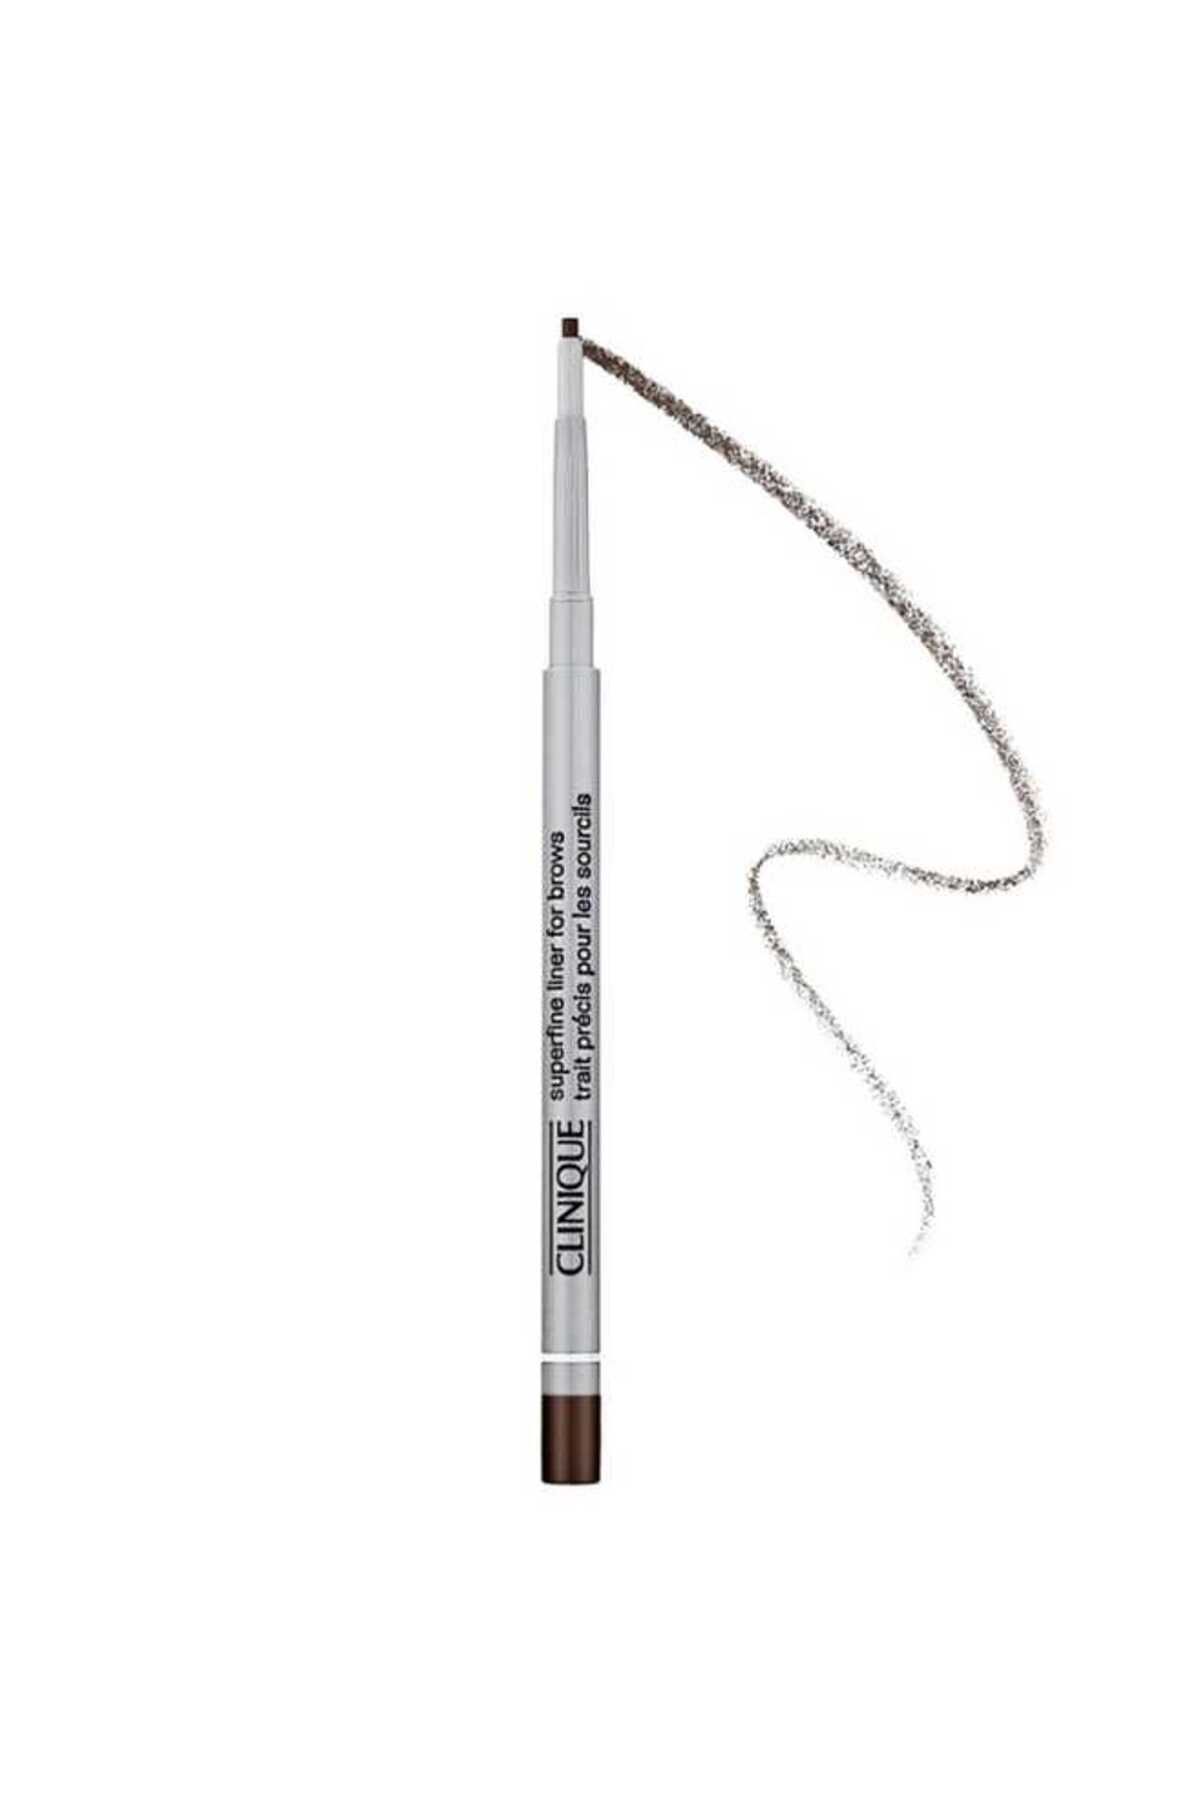 Clinique Superfine Liner For Brows 02